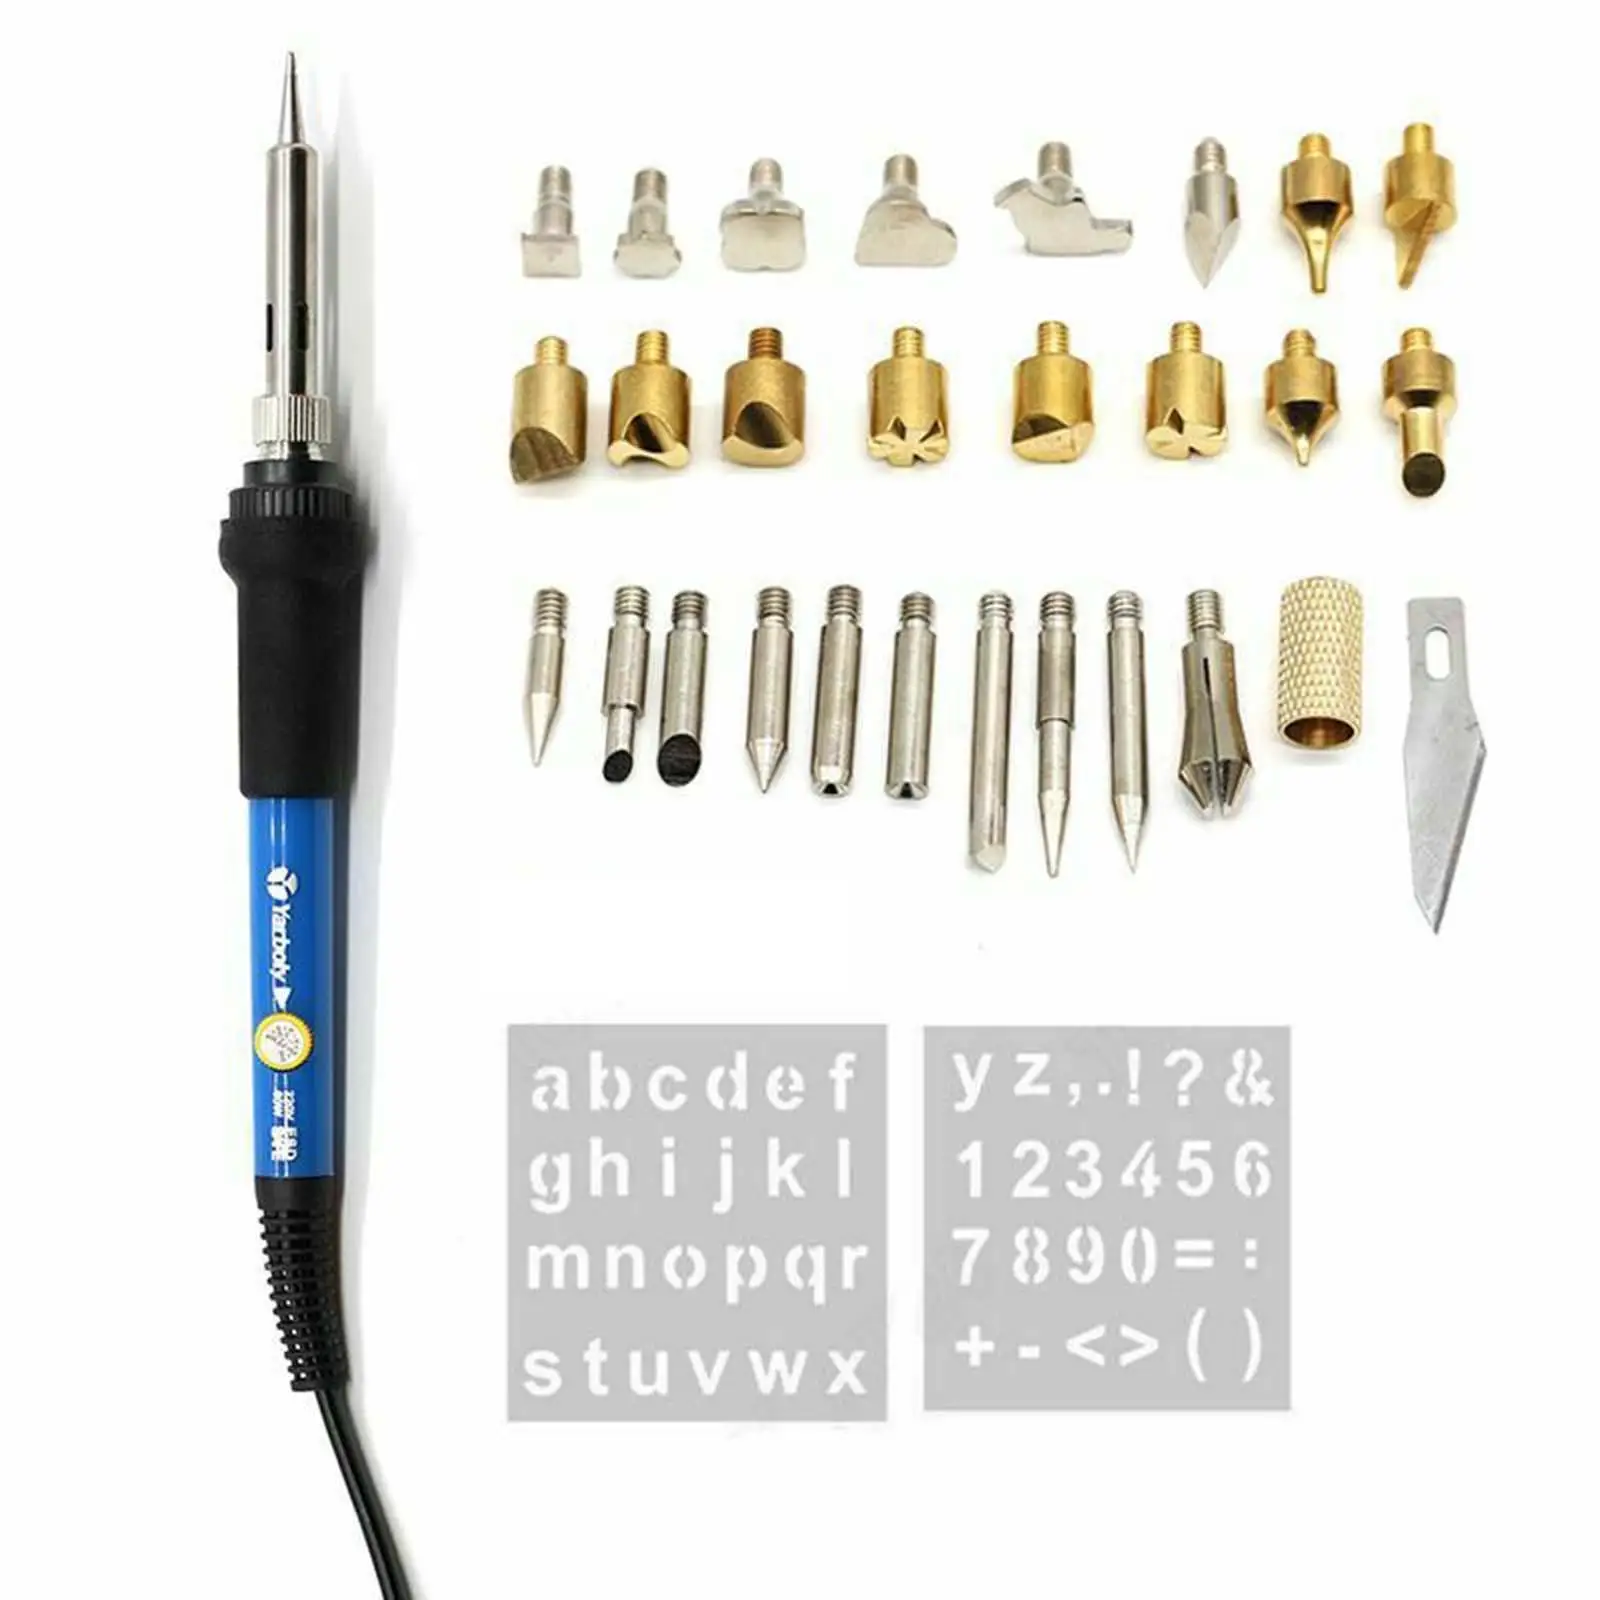 30x Solder Iron Tool with Soldering Tips Electronic Product Welding 60W Portable DIY Soldering Iron Kit Electronic Soldering Pen